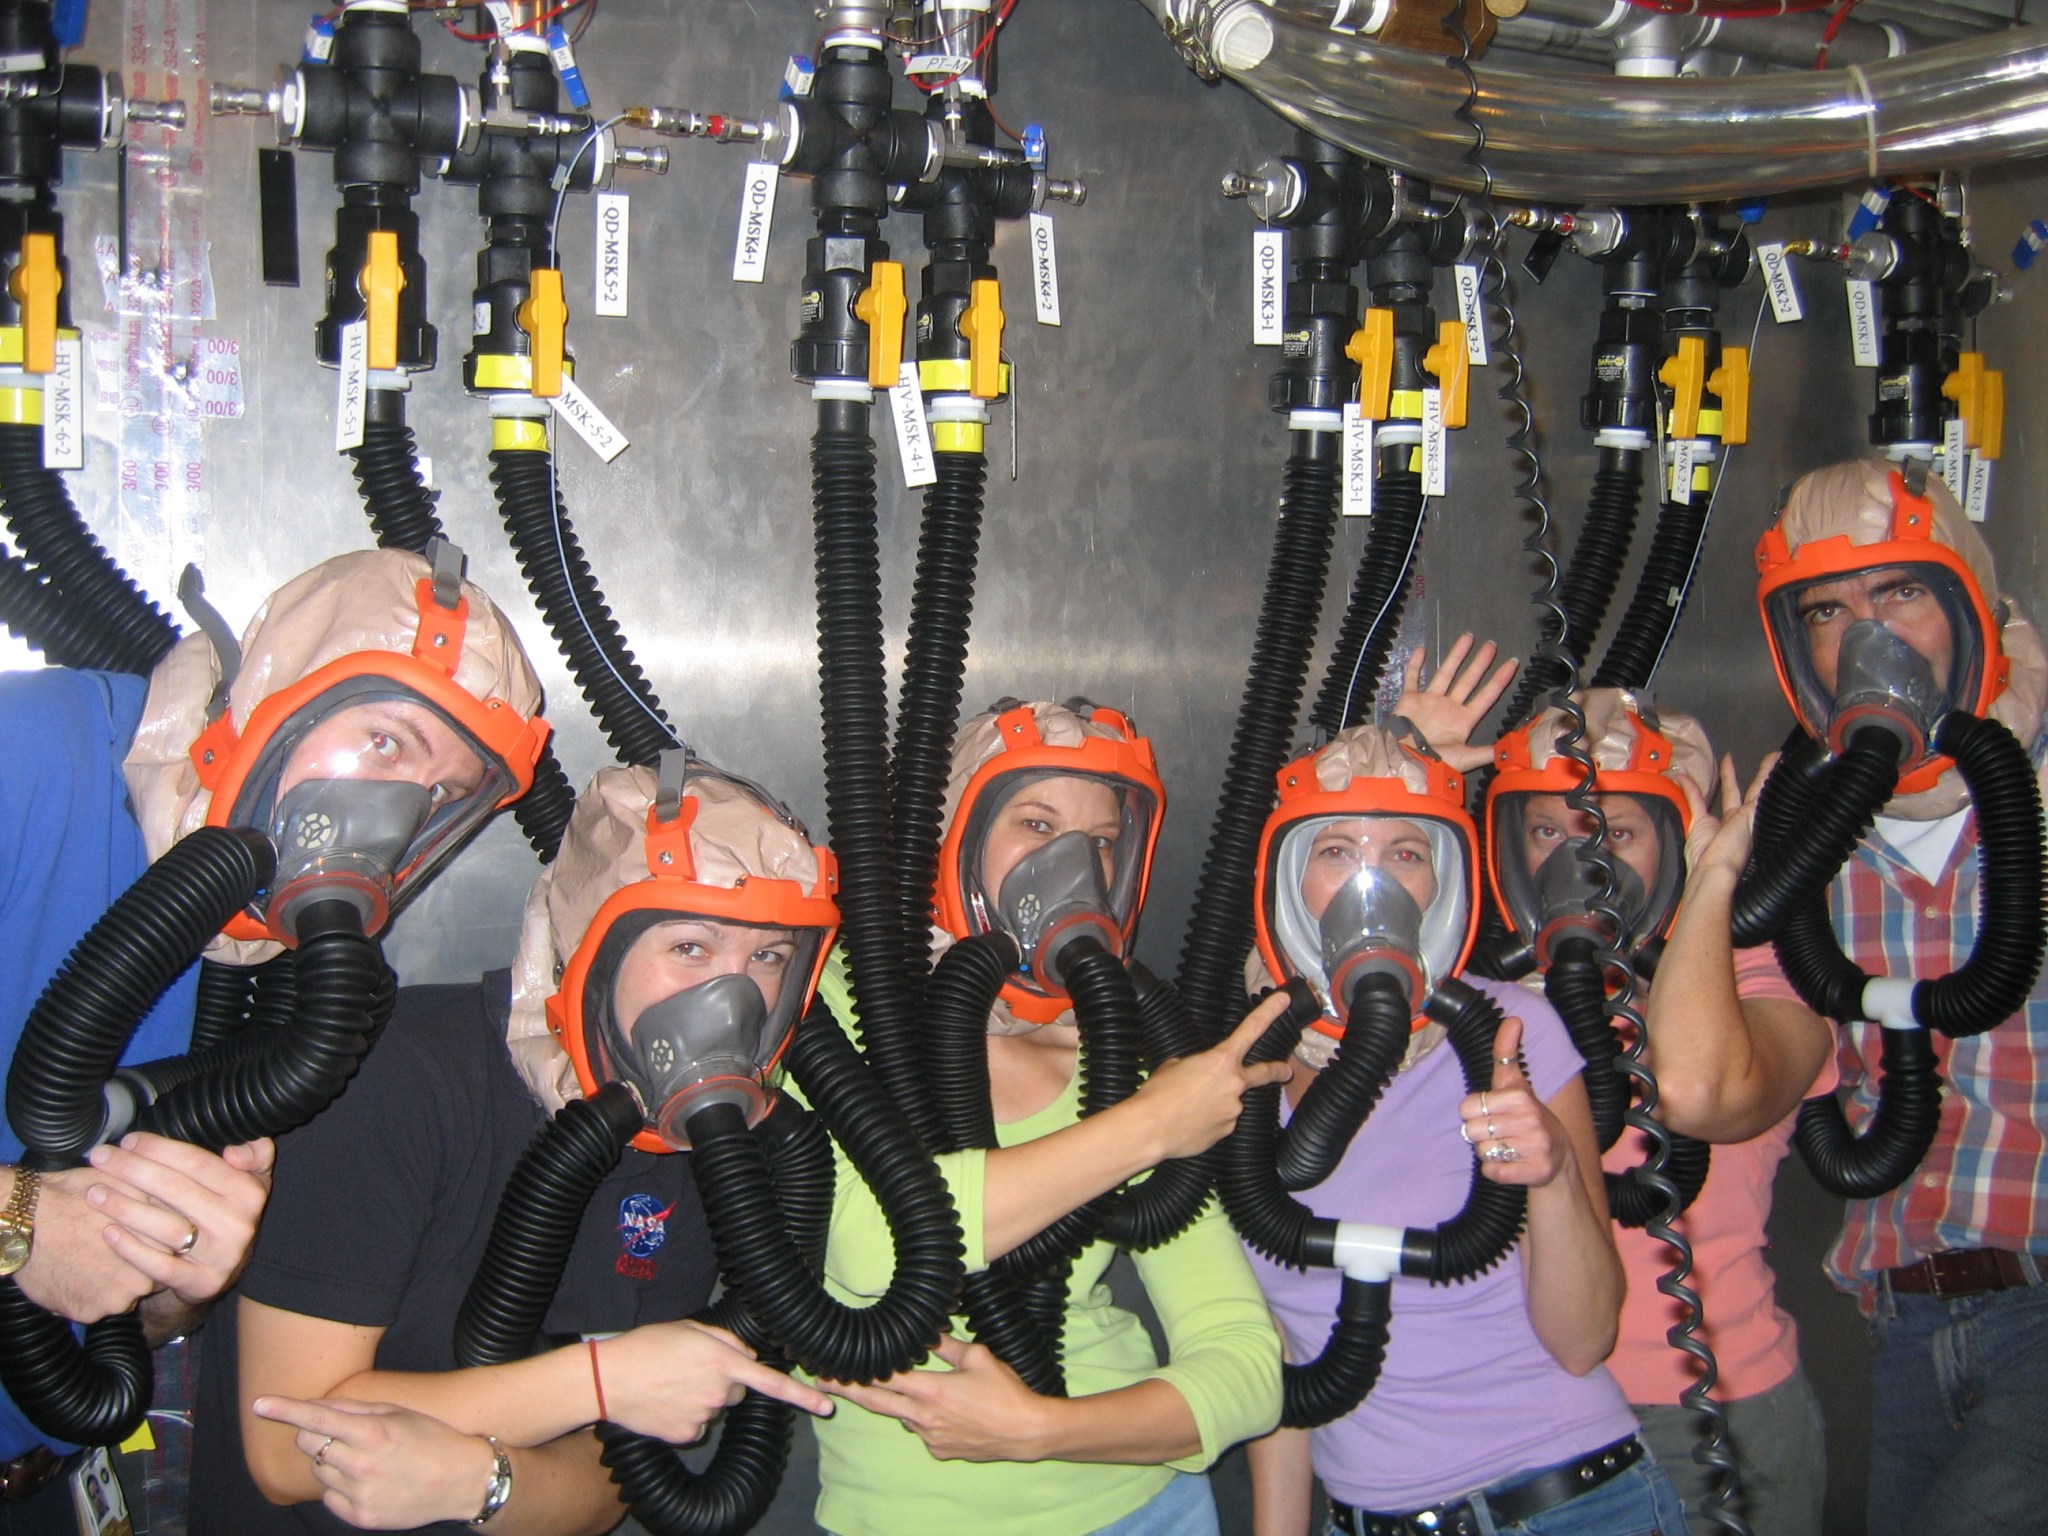 Six test subjects wearing respiratory masks in altitude chamber